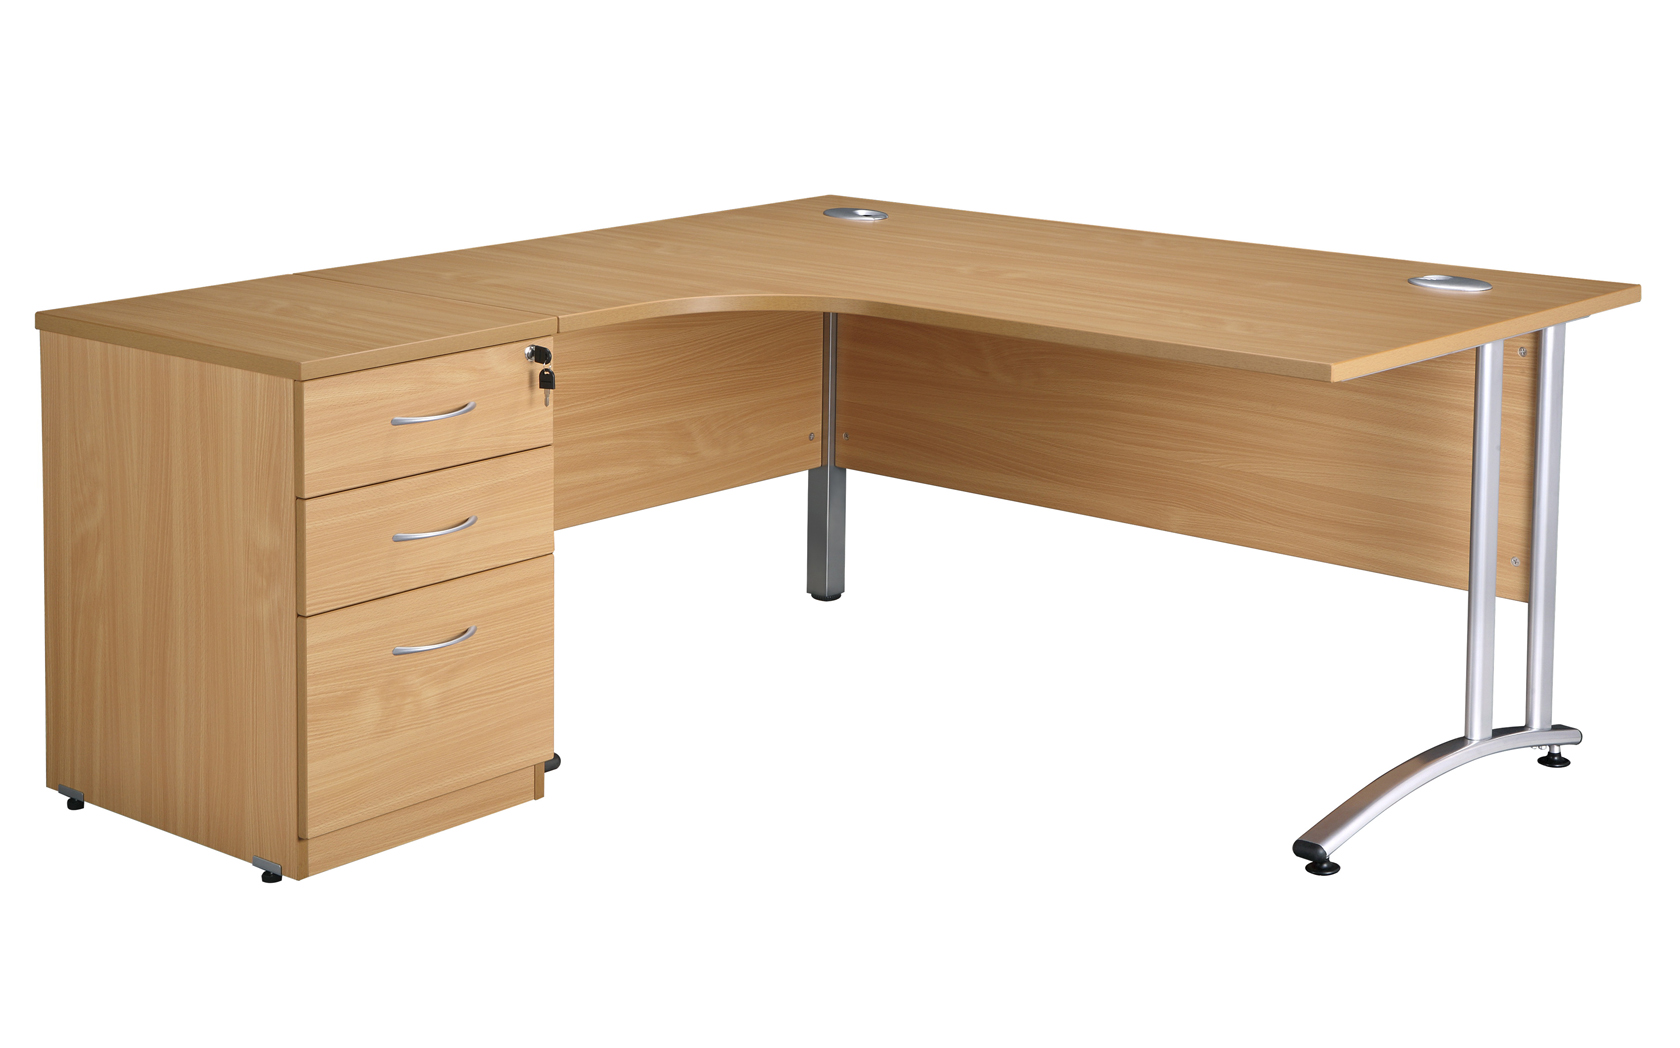 Budget radial desk left or right hand workstation beech or oak 1600x1200  or 1800x1200  with matching desk high pedestal 600 deep 